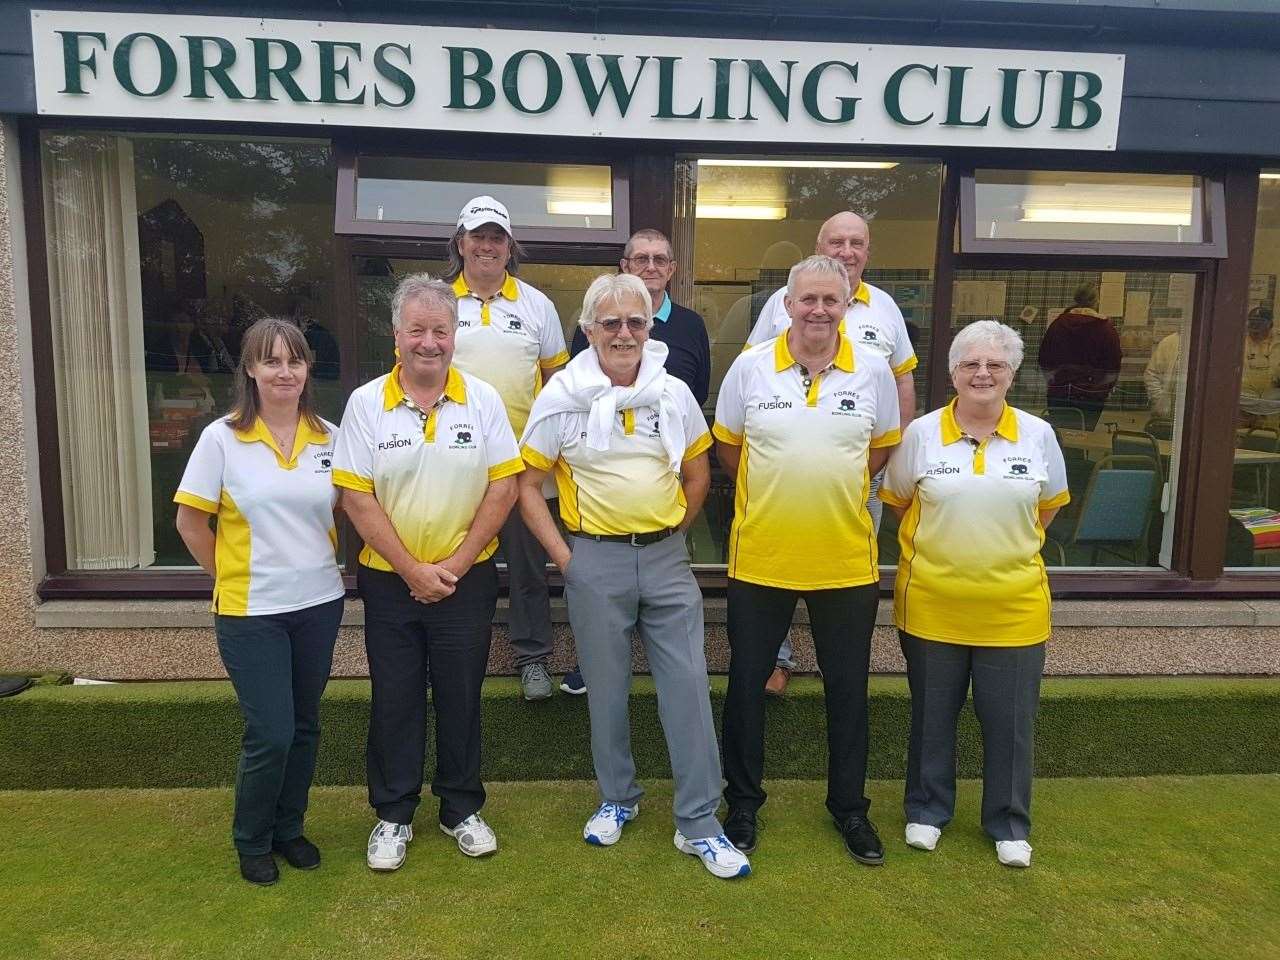 Singles and pairs knockout winners at Forres Bowling Club. Back Row (left to right): Dean Dobbs, Derek Sobey and Charlie Watt. Front row: Lesley Coutts, John Ross, John Matthews, Brian Riddell and Mary Sobey.